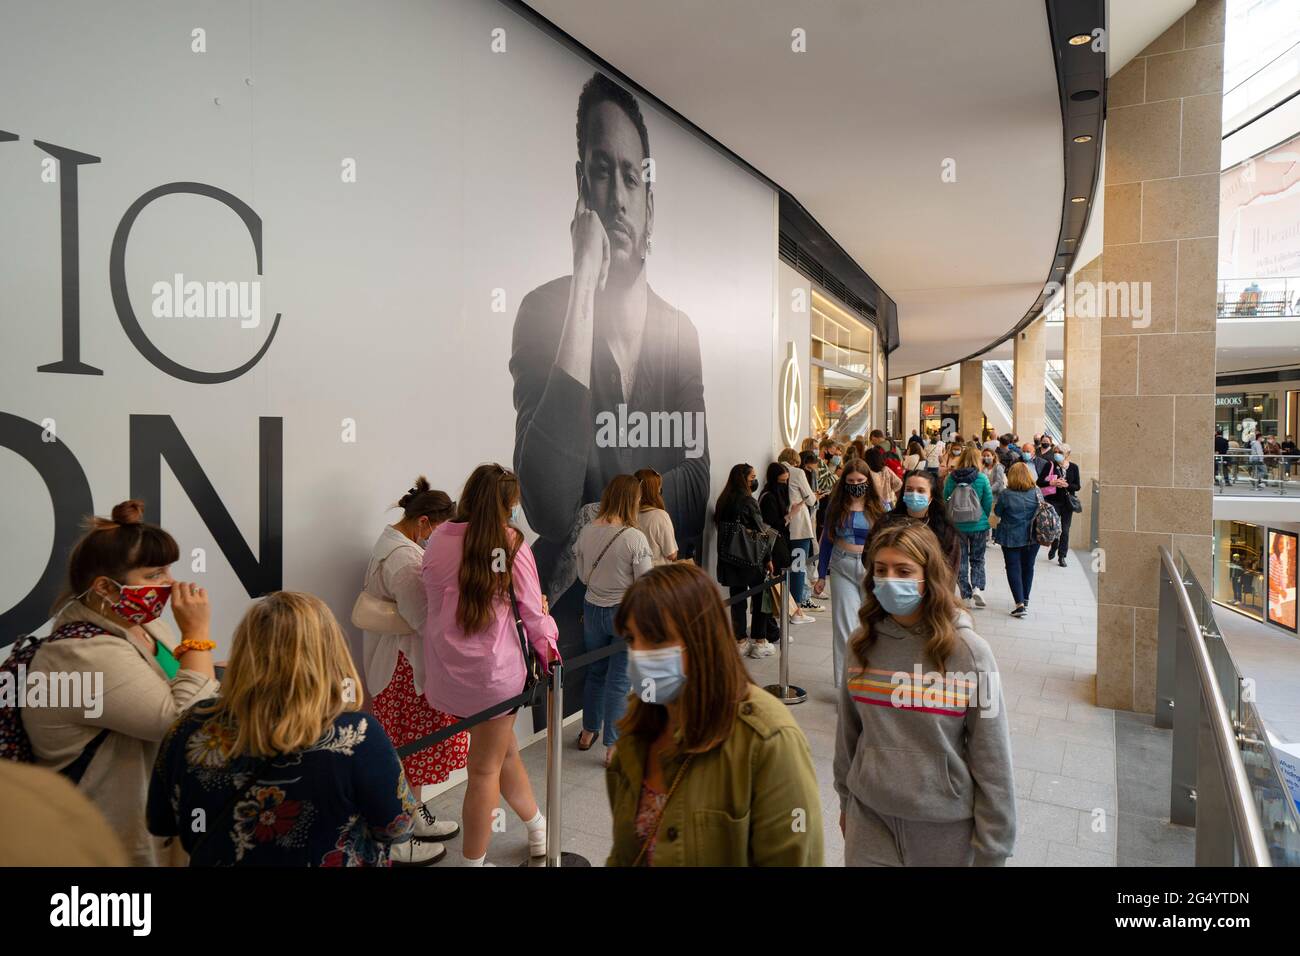 Edinburgh, Scotland, UK. 24 June 2021. First images of the new St James Quarter which opened this morning in Edinburgh. The large retail and residential complex replaced the St James Centre which occupied the site for many years. Pic; Mall busy with shoppers at lunchtime. Iain Masterton/Alamy Live News Stock Photo